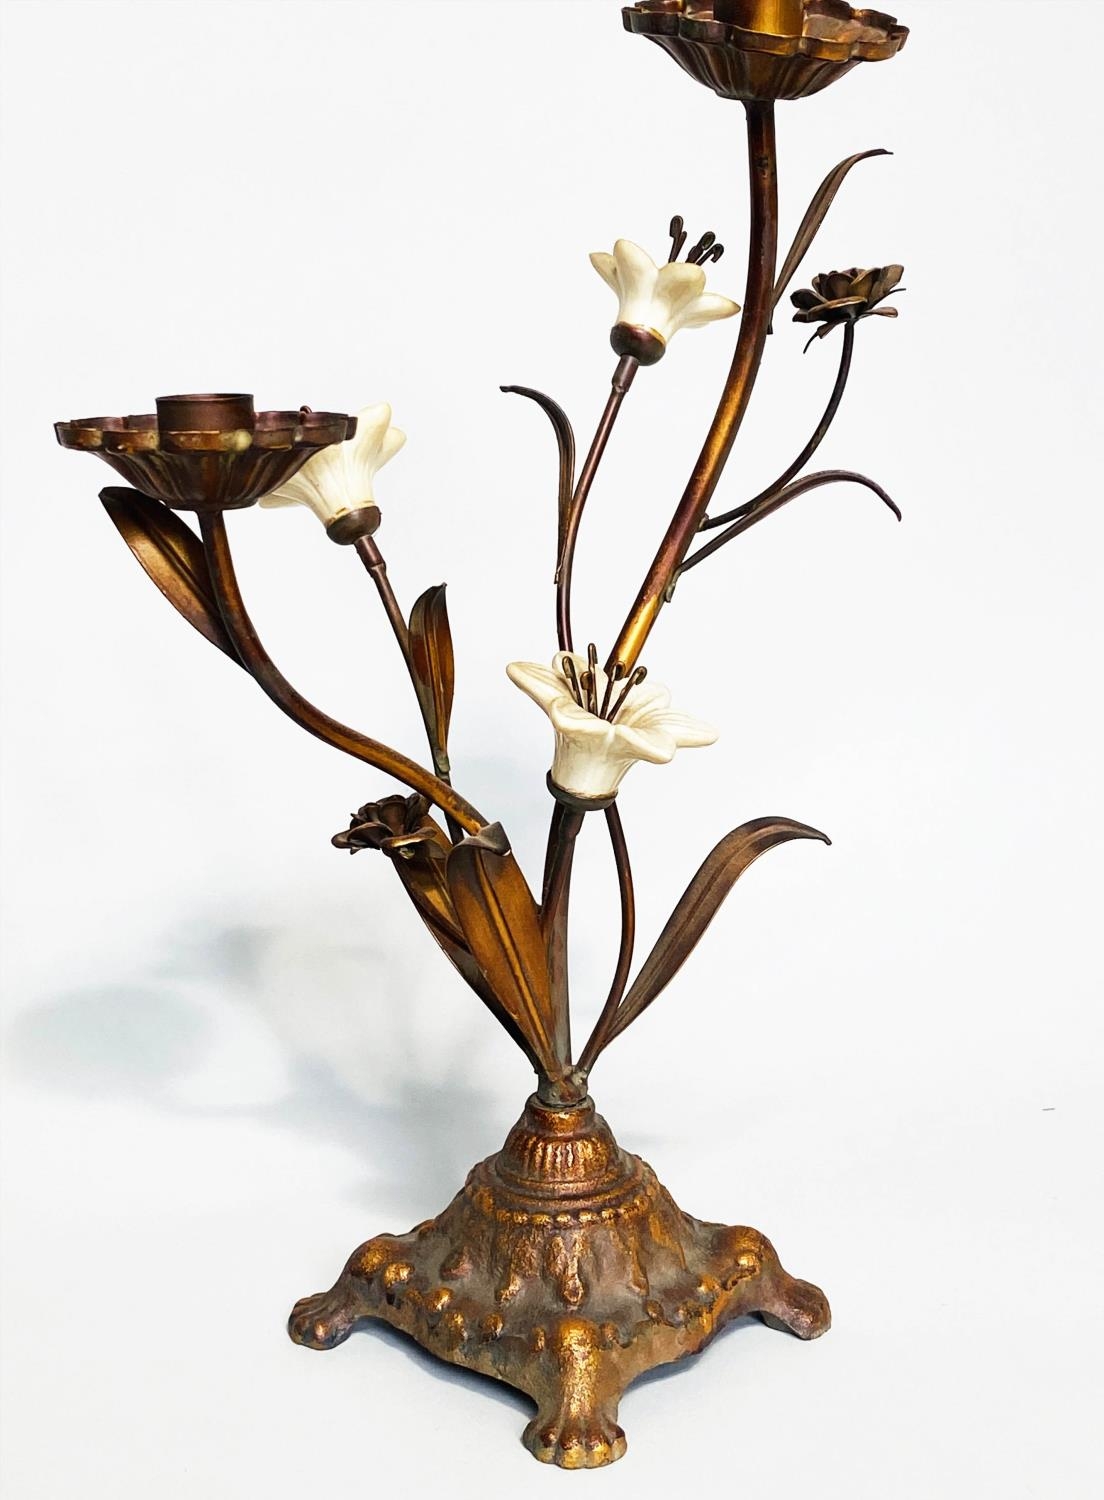 FLOWER CANDLESTICKS, a pair, Italian style cast bronzed metal with ceramic flower heads, 40cm H. (2) - Image 6 of 6